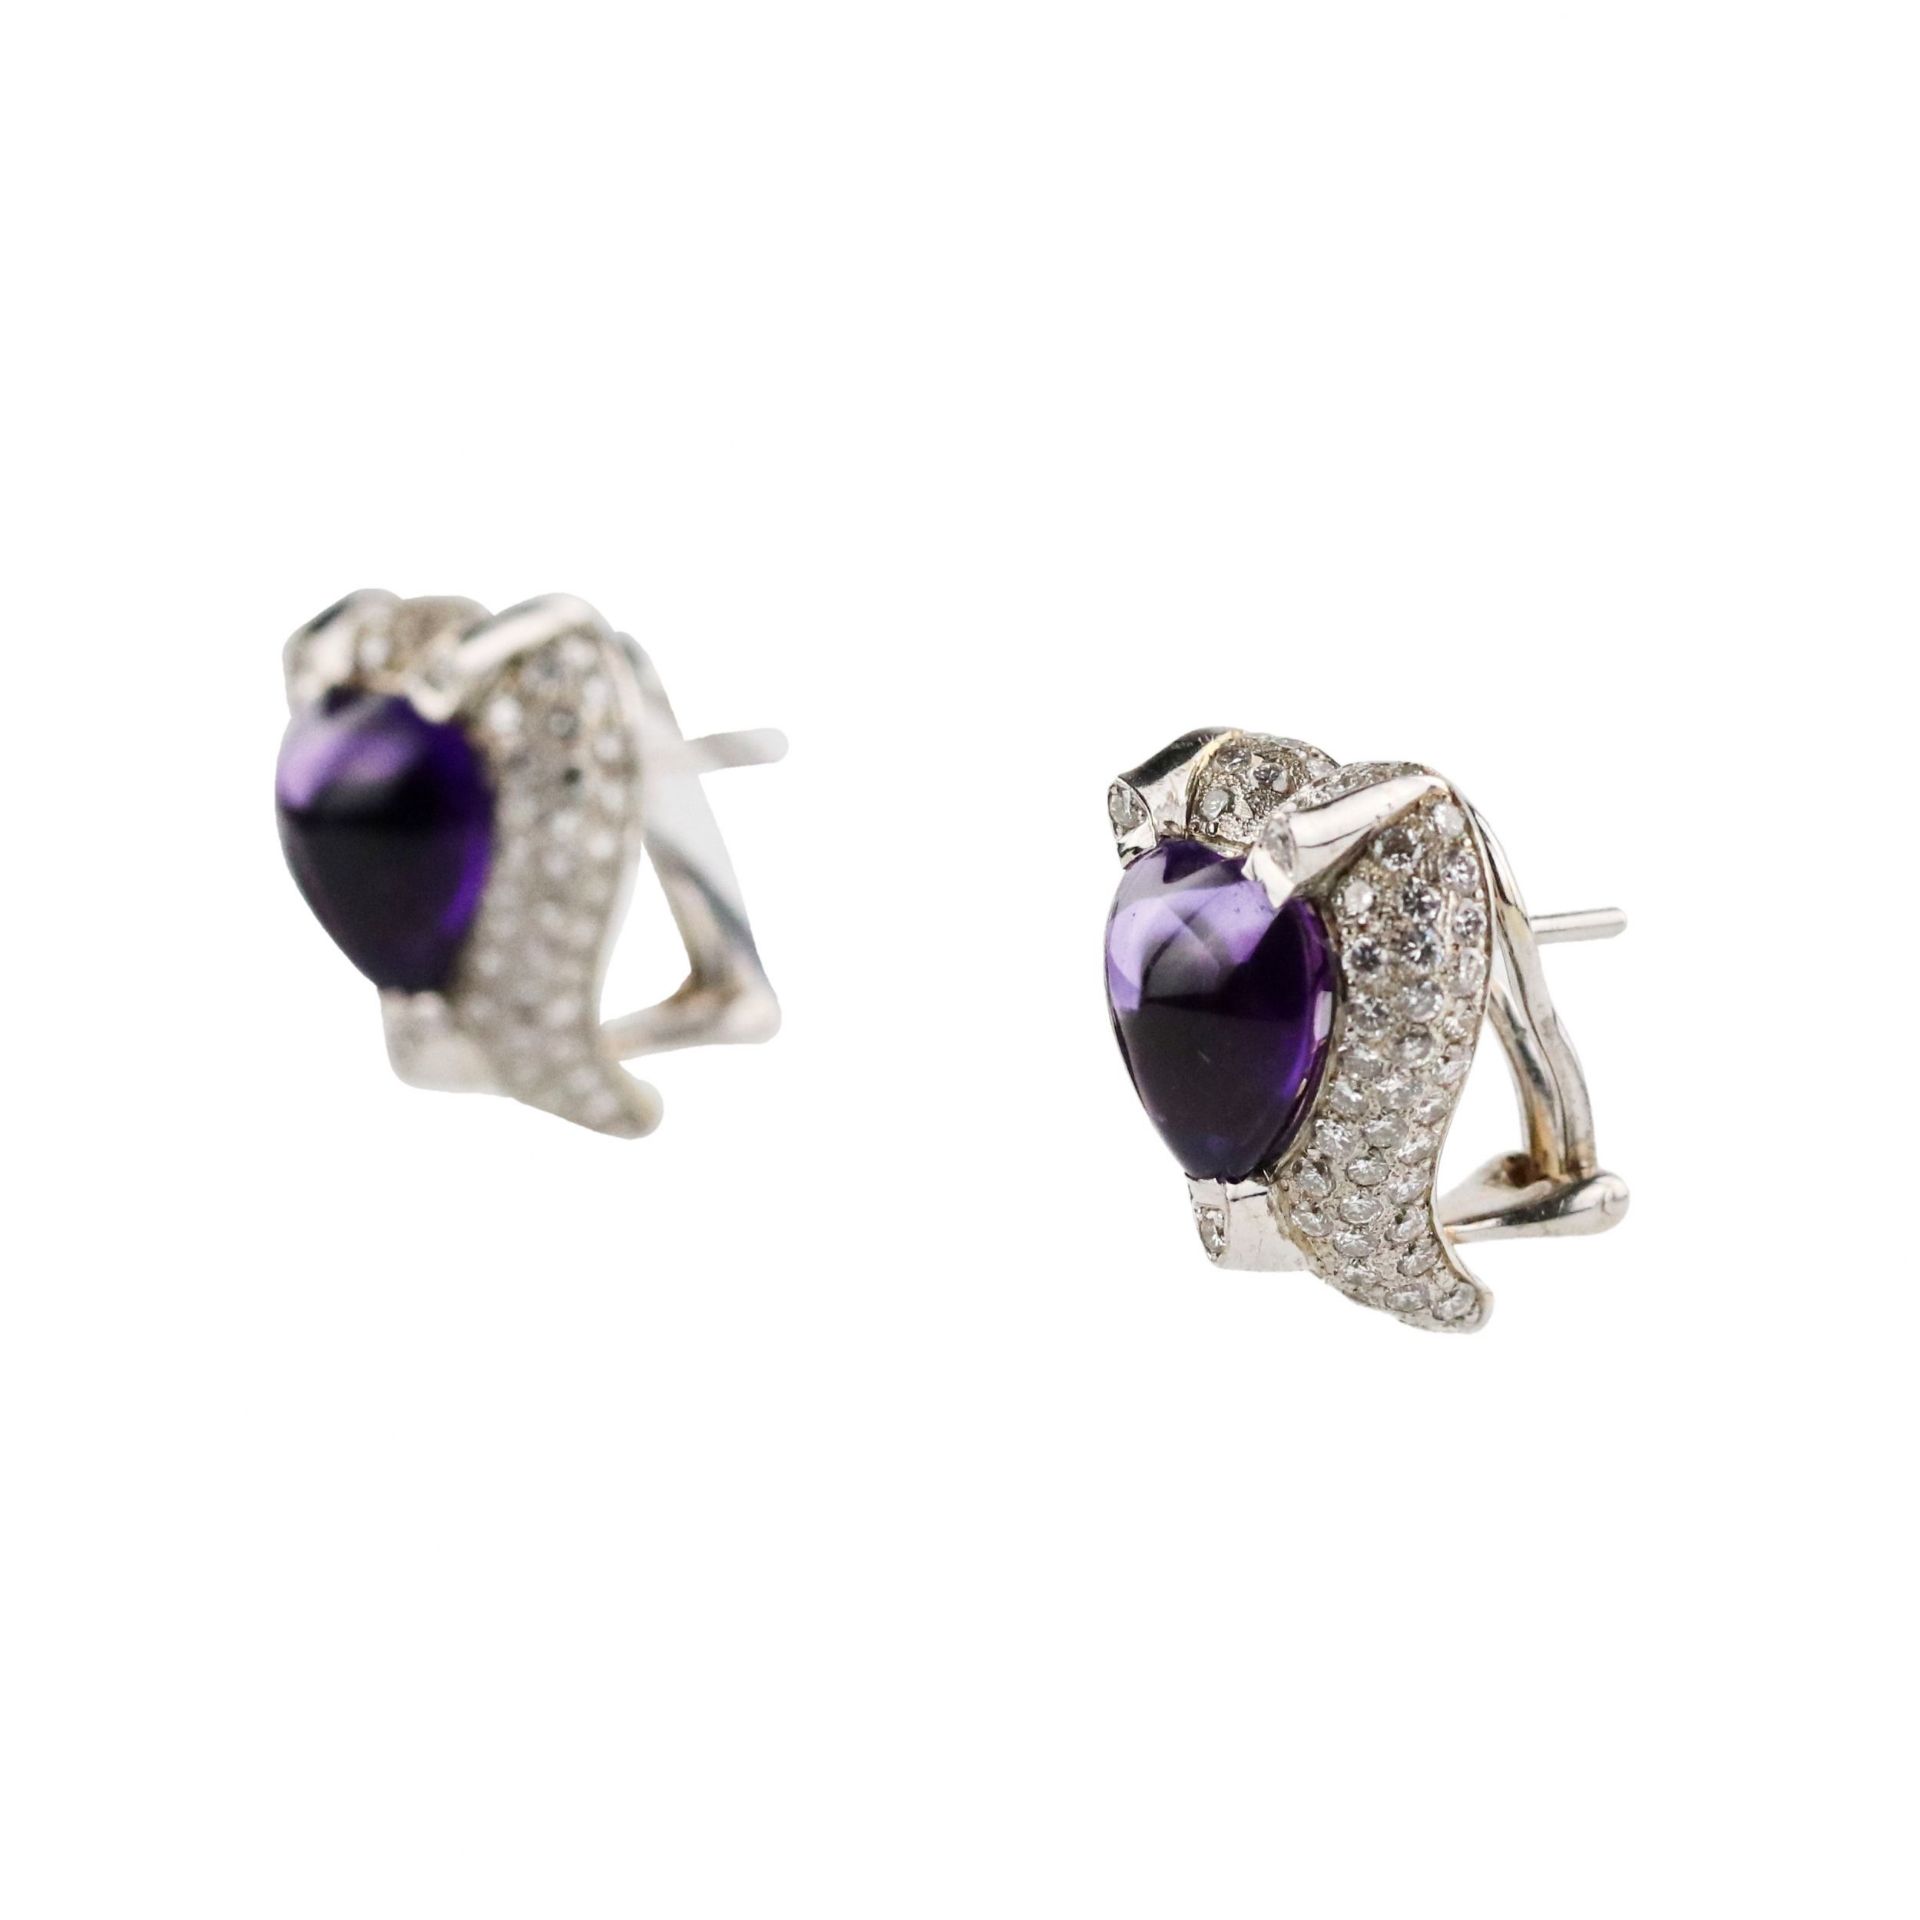 Jewelry set: ring with earrings, white gold with amethysts and diamonds. - Image 7 of 11